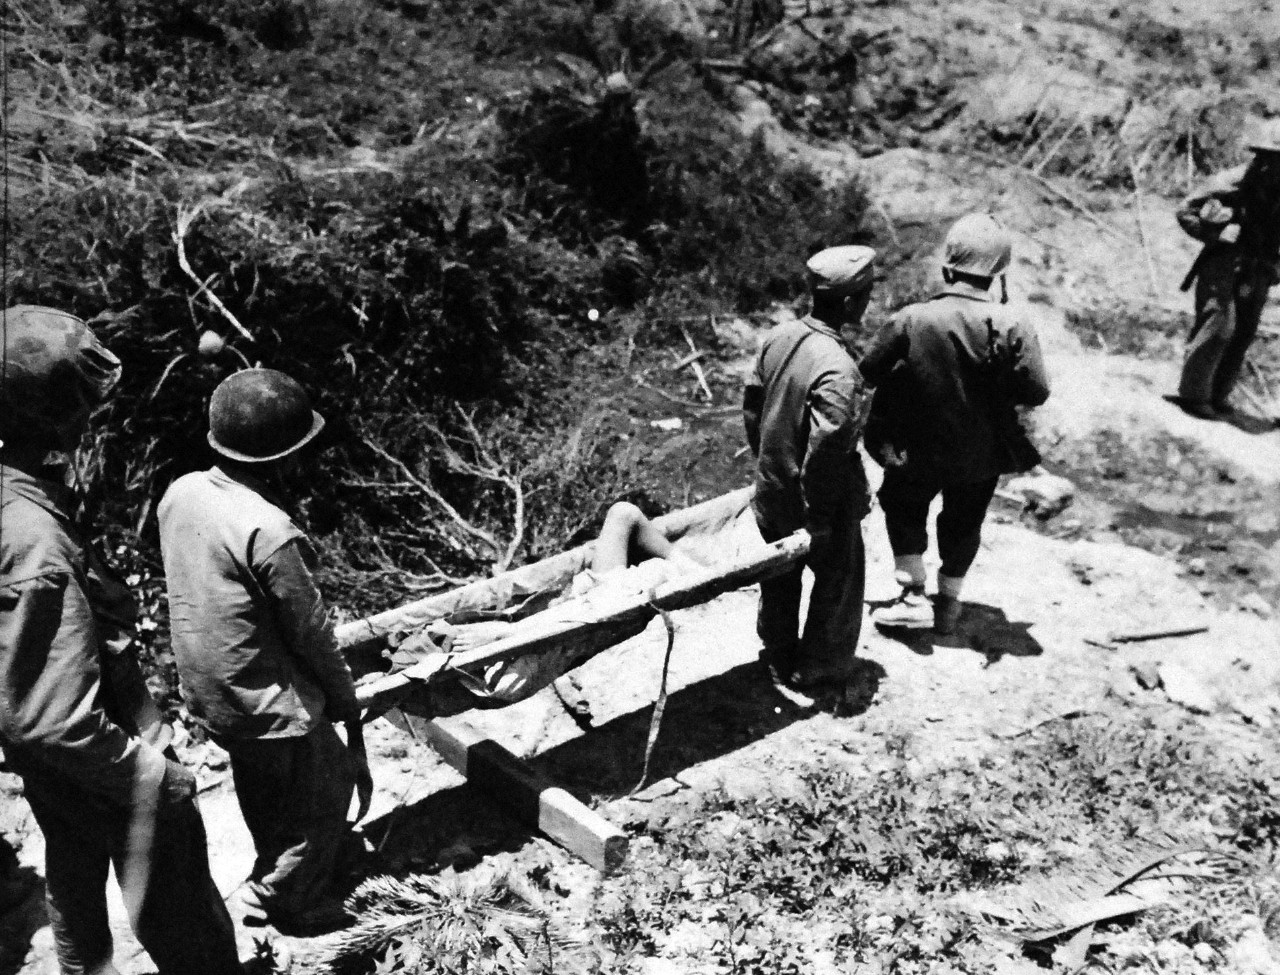 Okinawa Campaign, April-June 1945.   Japanese captured by Sixth Marine Division on Okinawa.  Photographed by Staff Sergeant Connolly,  June 21, 1945.  Official U.S. Marine Photograph, now in the collection of the National Archives.  (2014/7/23). 